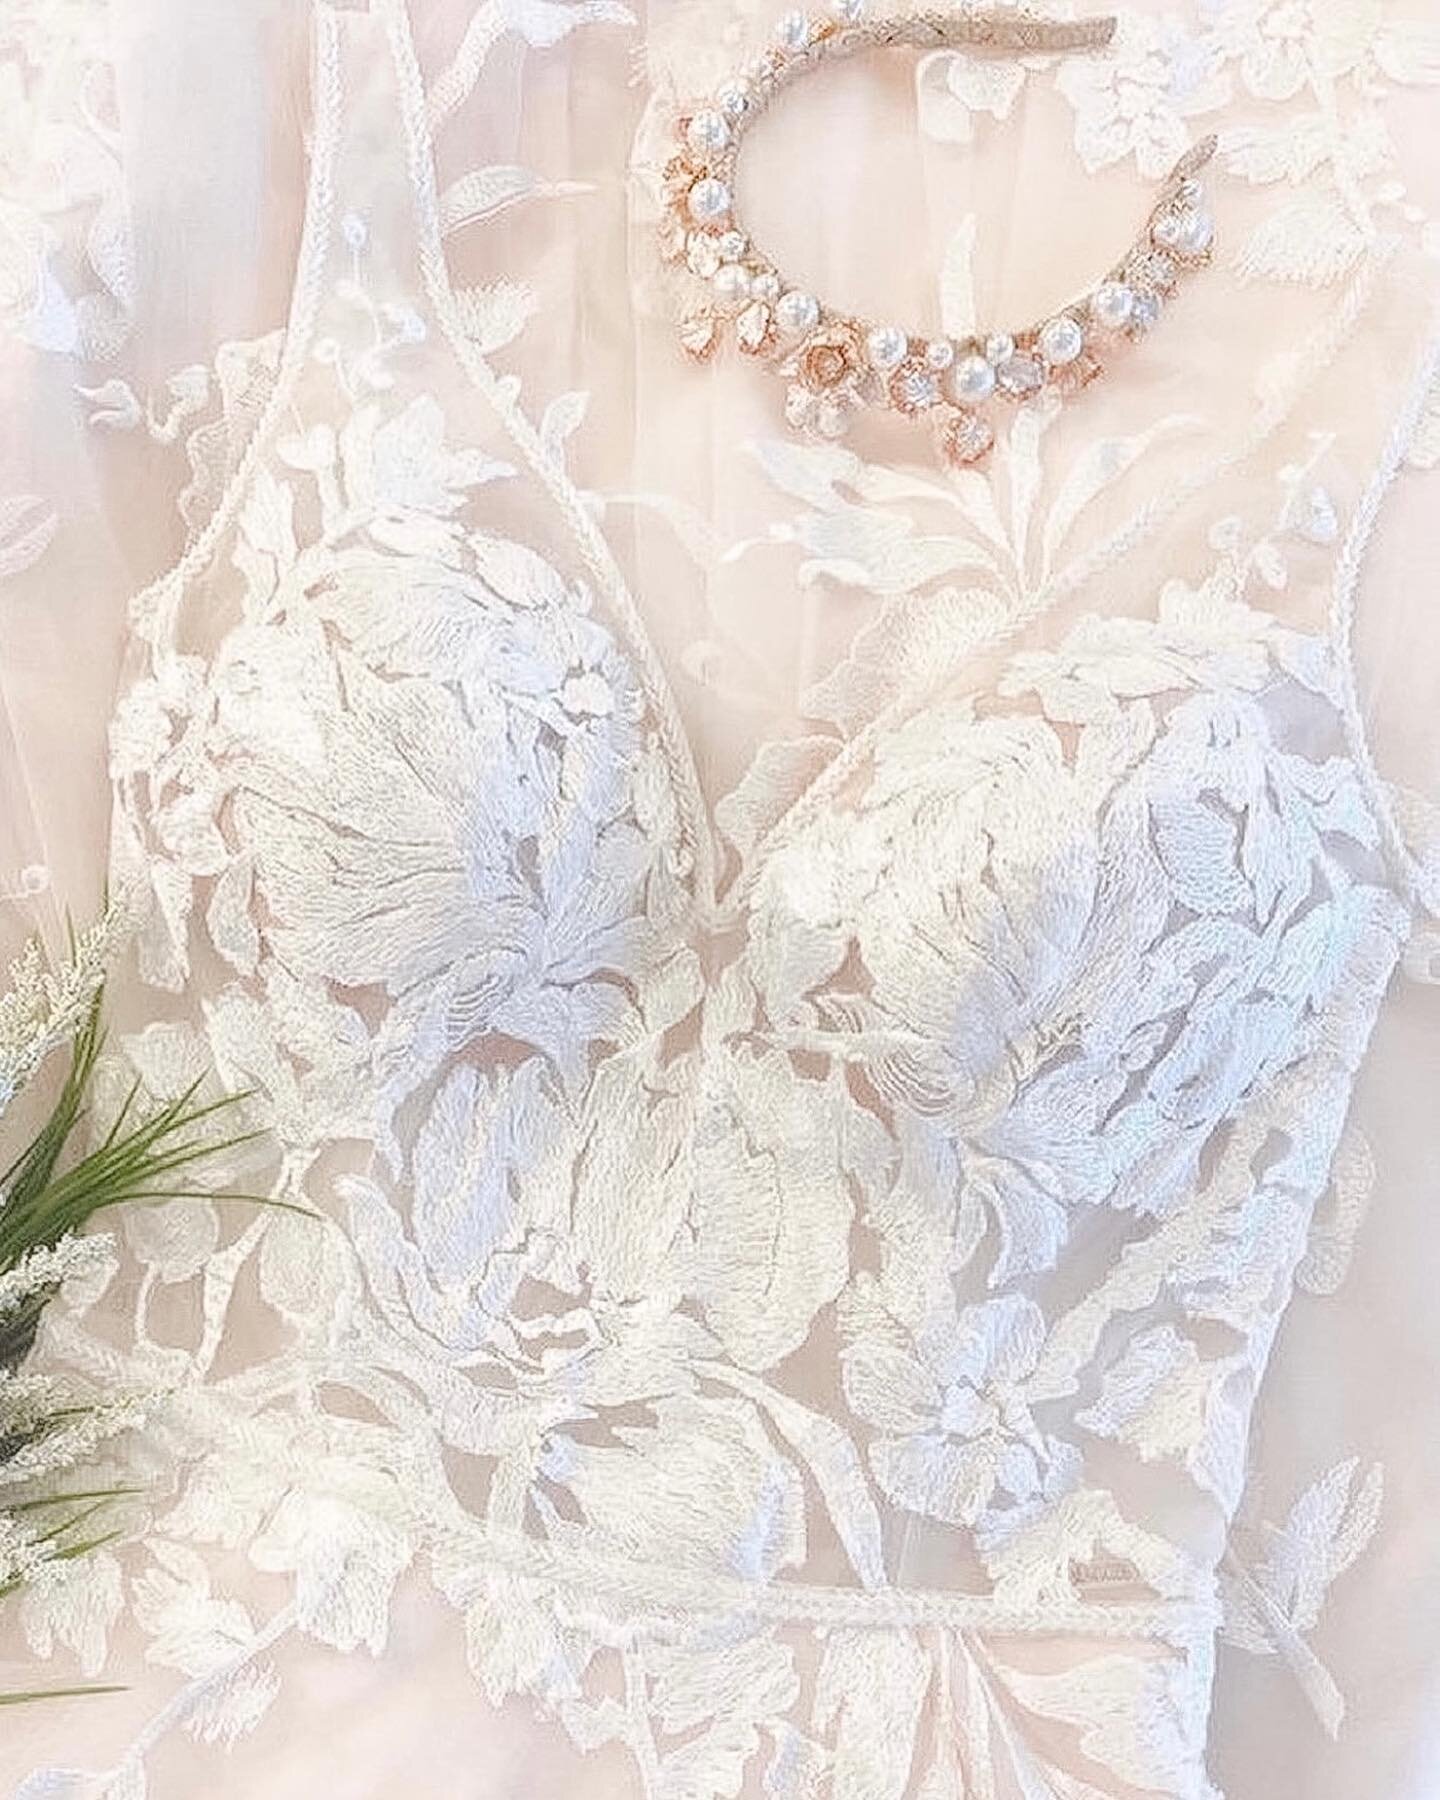 NEW DRESS ALERT🤍🥳 Sasha by Maggie Sottero is the perfect blend of both romantic and dimensional. This big, floral lace A-line wedding dress is nature-inspired perfection🌸

Available in our store in Ivory/Blush in a size 16!